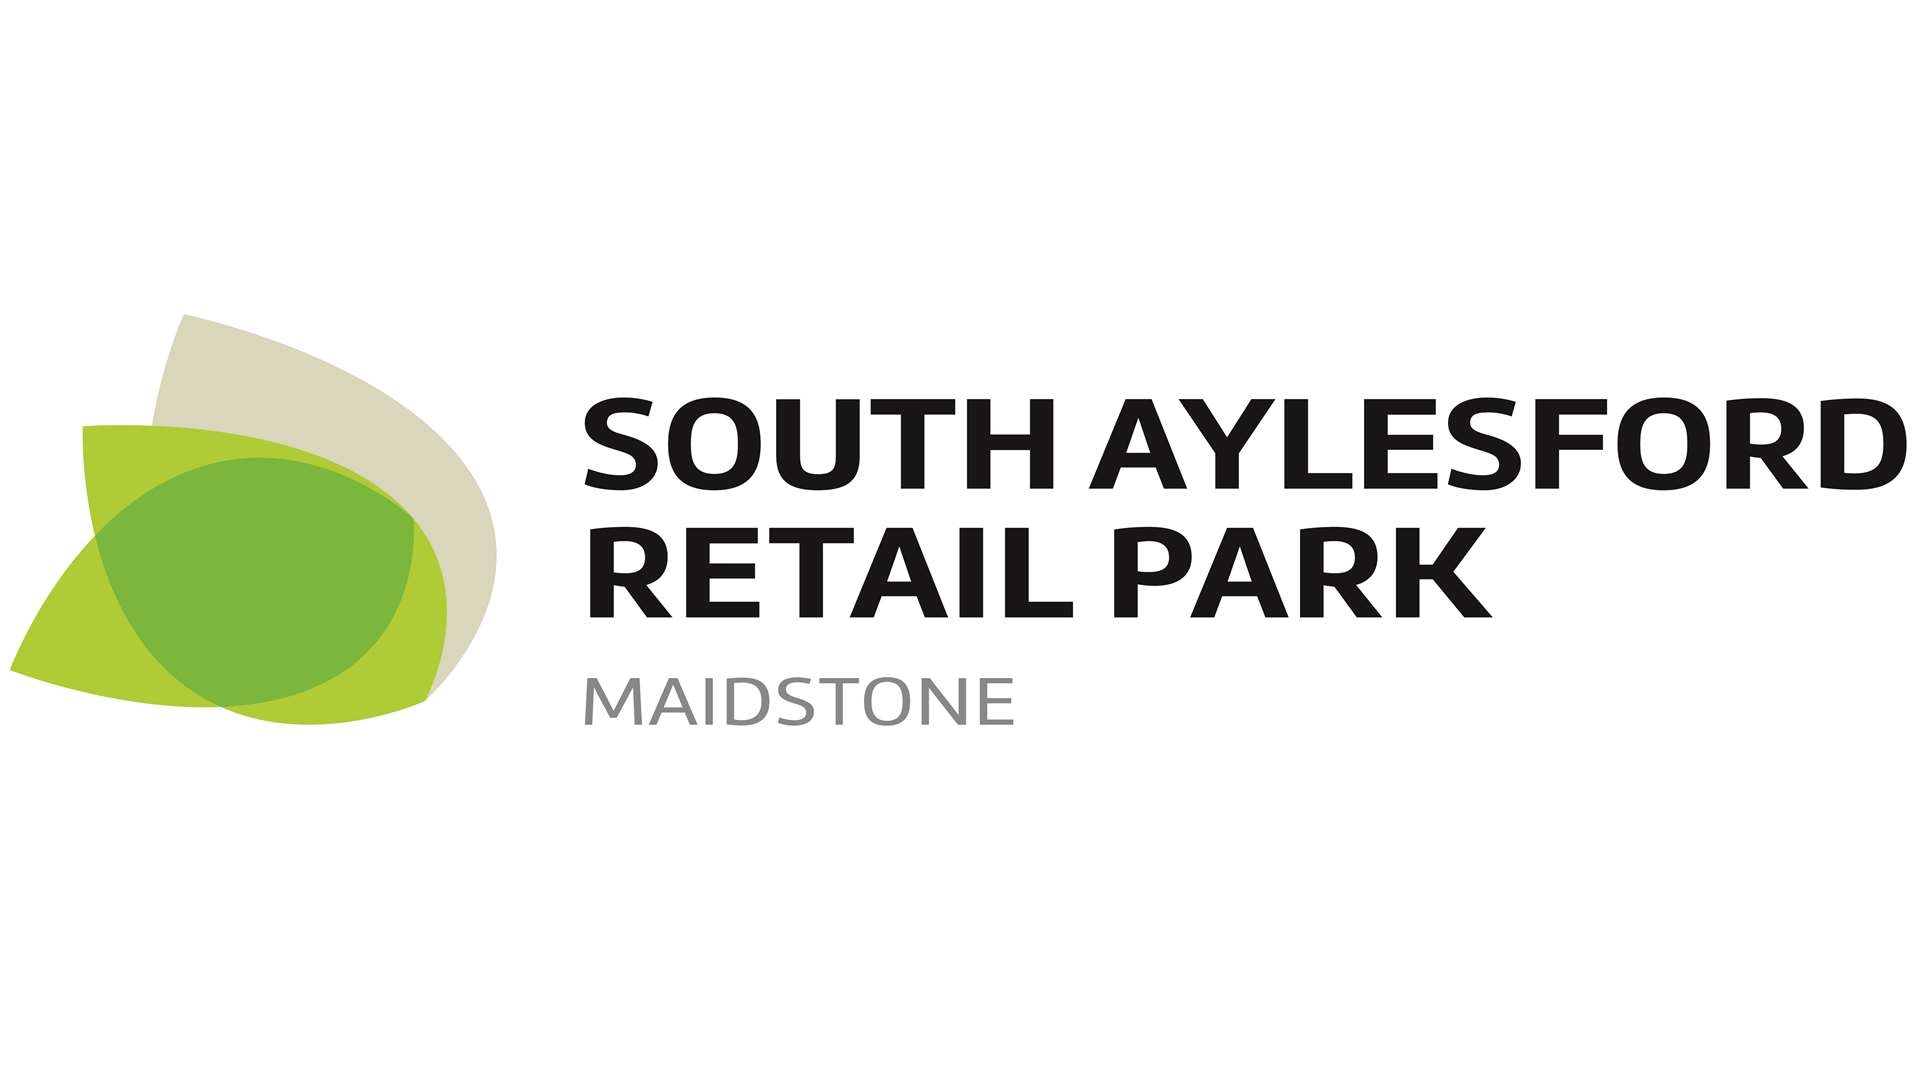 South Aylesford Retail Park has retailers full of Mother's Day gift ideas